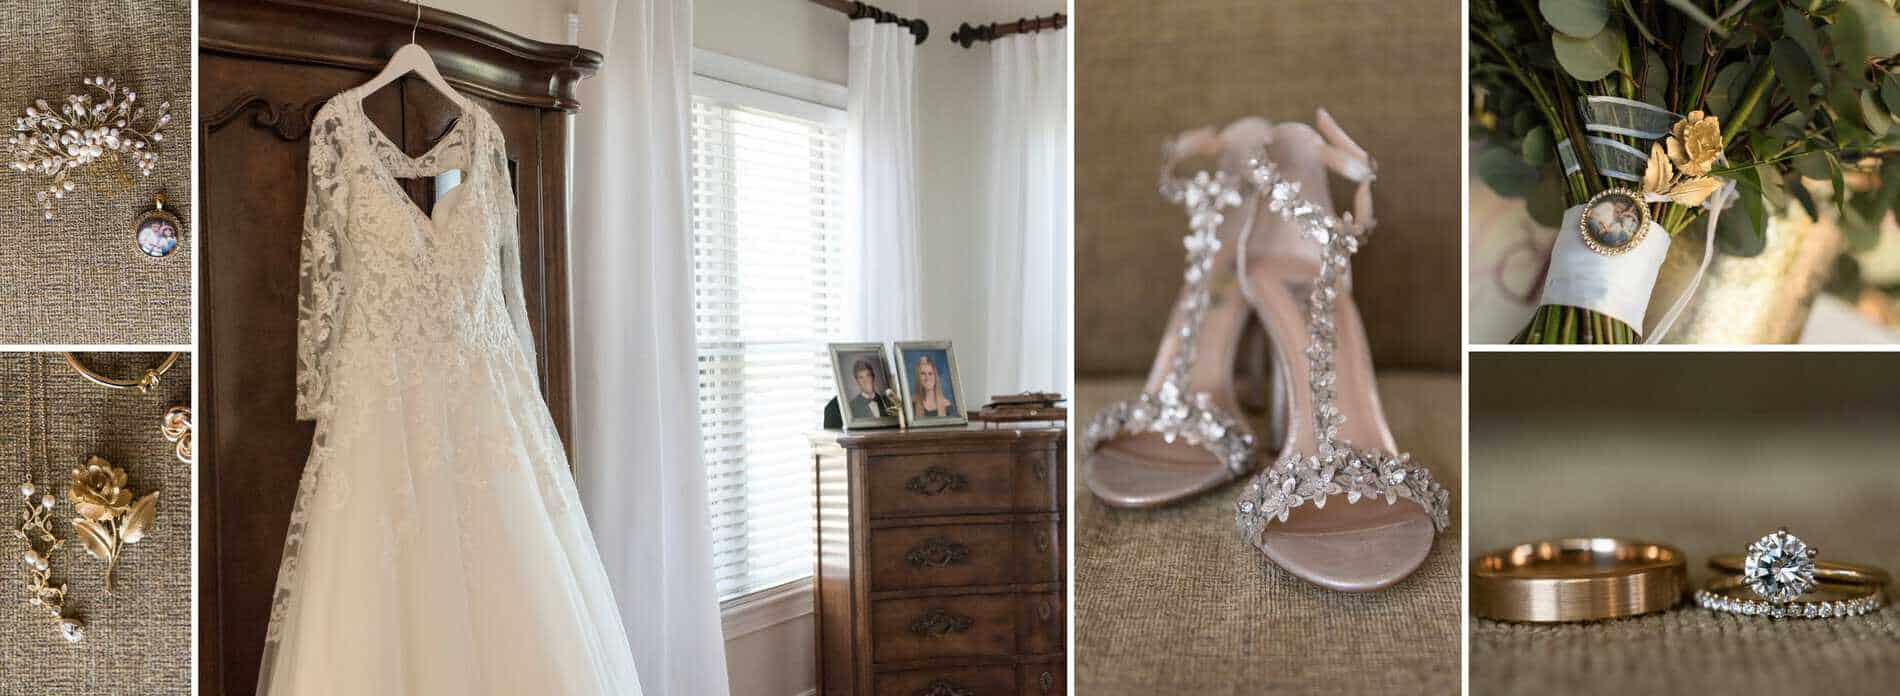 Wedding shoes, dress, rings and flowers